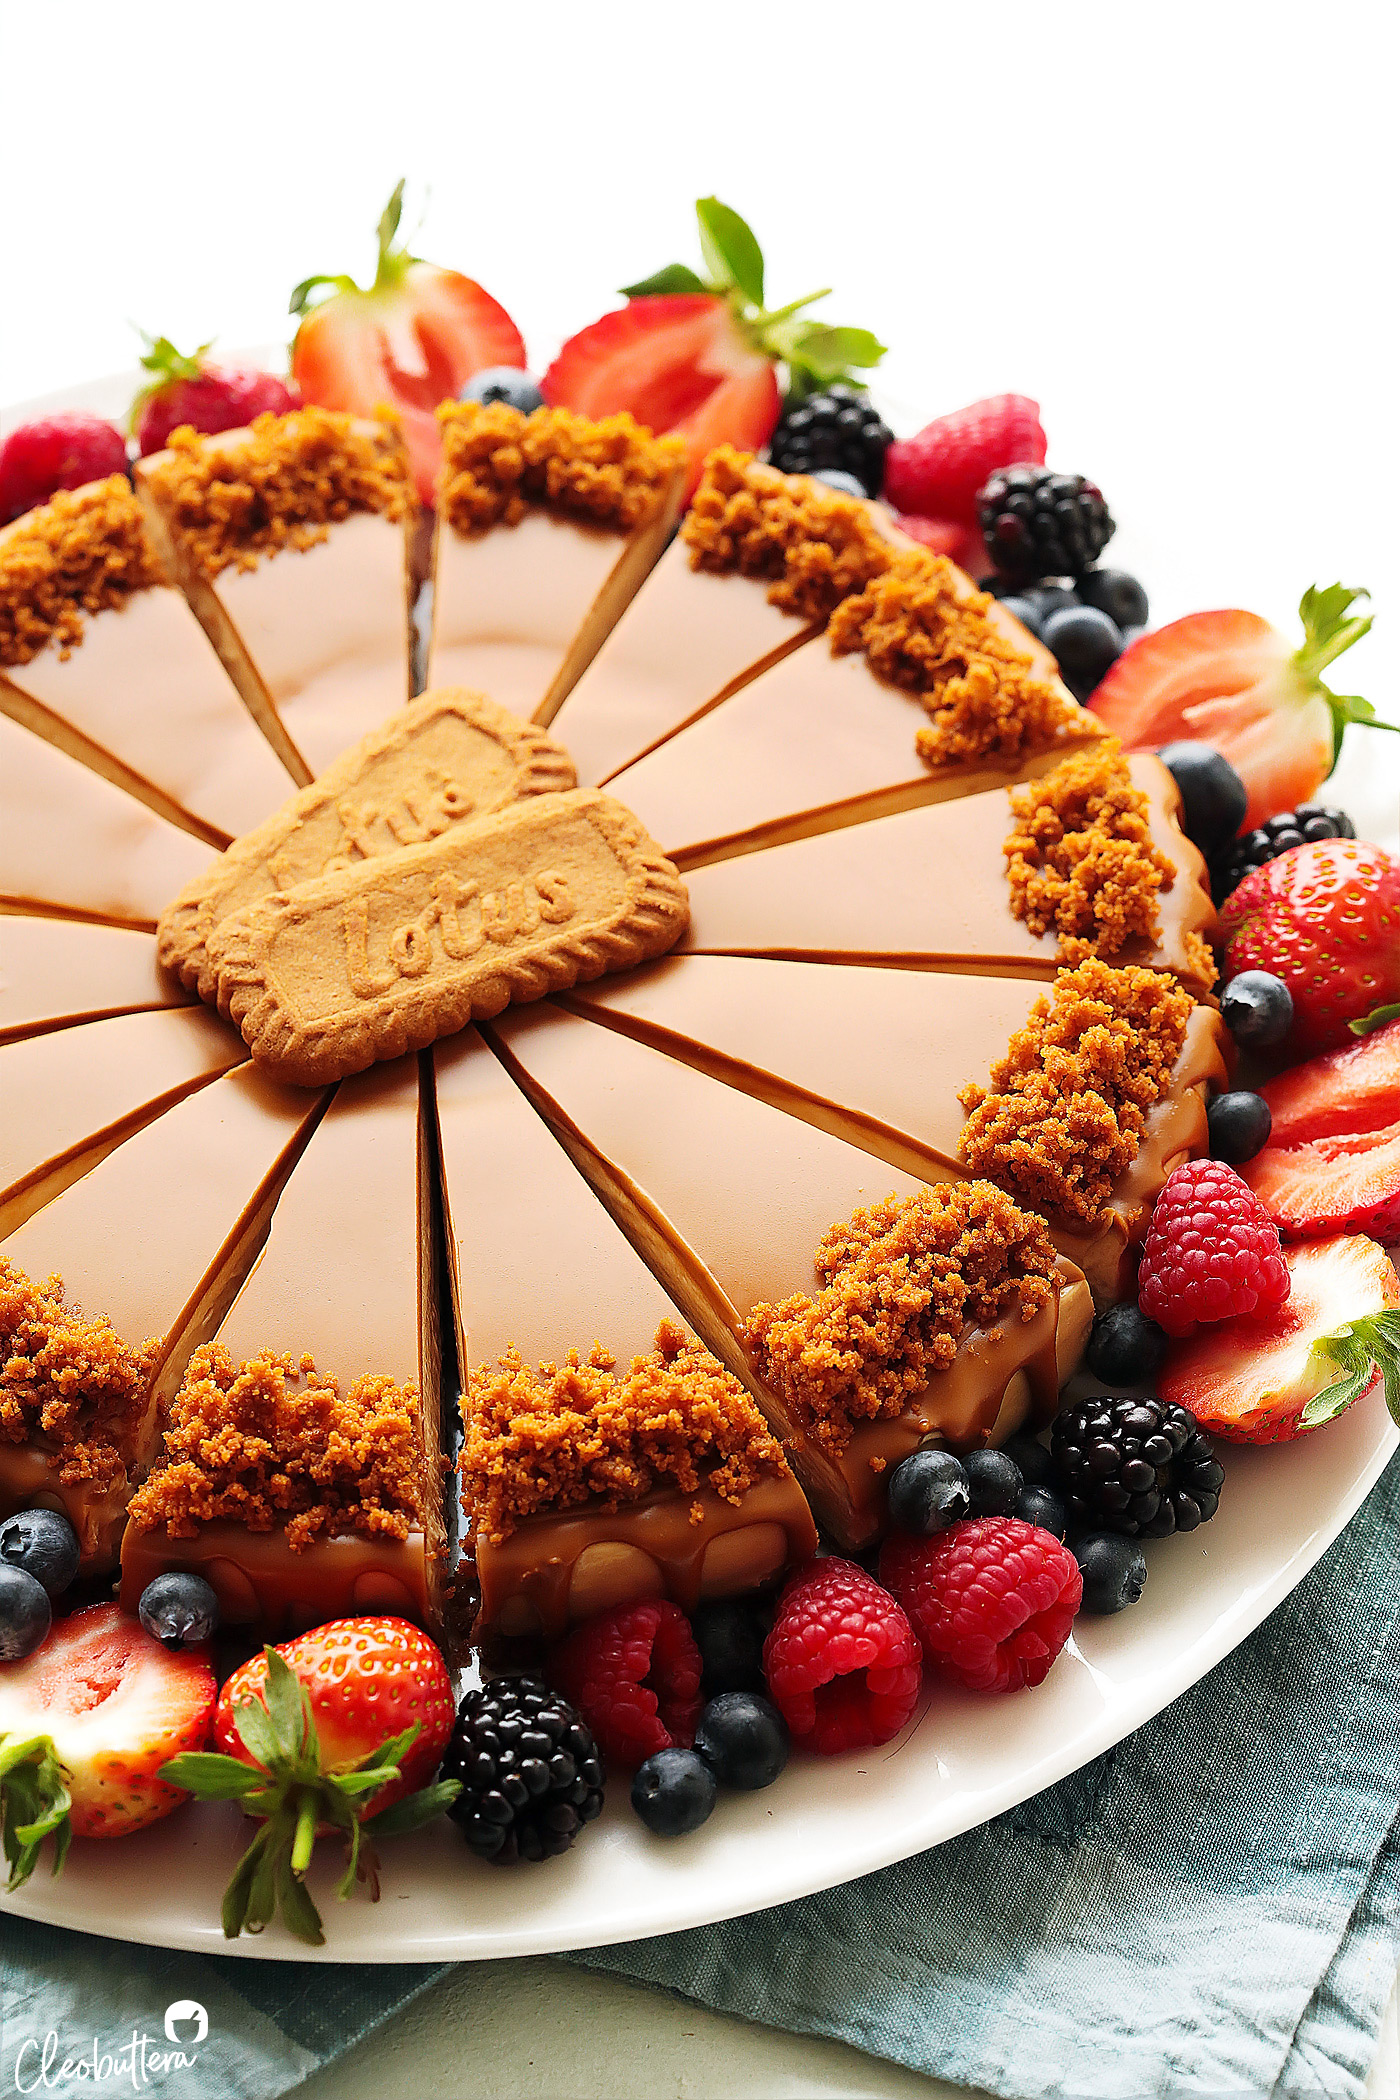 Lotus Biscoff Baked Cheesecake – Love and Cheesecake